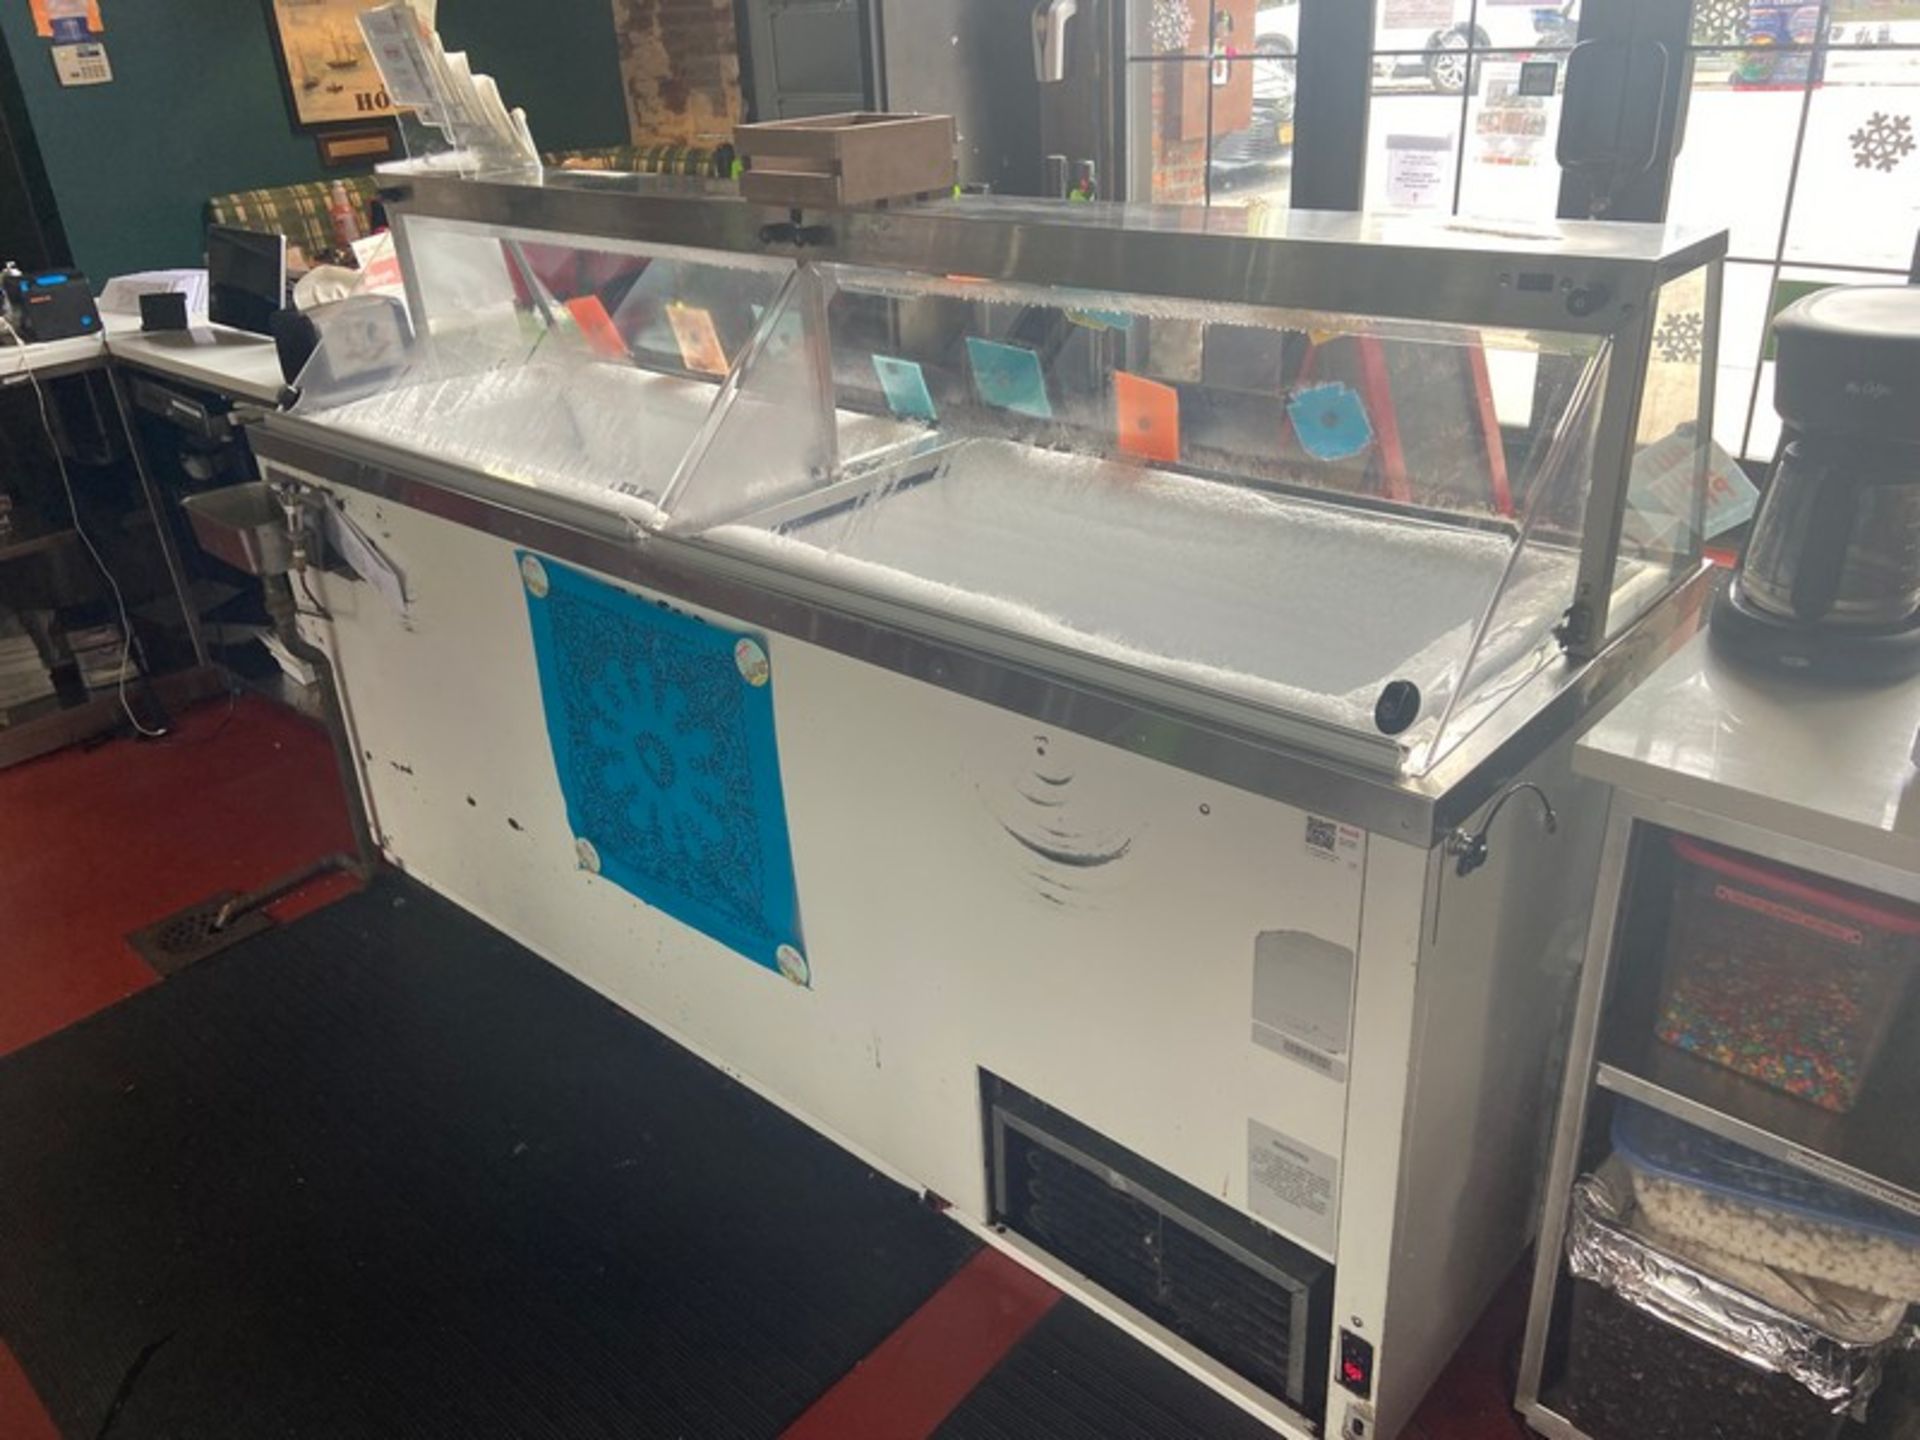 C. Nelson MFG. Co. Freeze Scoop Display Case, M/N RJEZ90G100, Overall Dims.: Aprox. 88" L x 27" W - Image 4 of 7